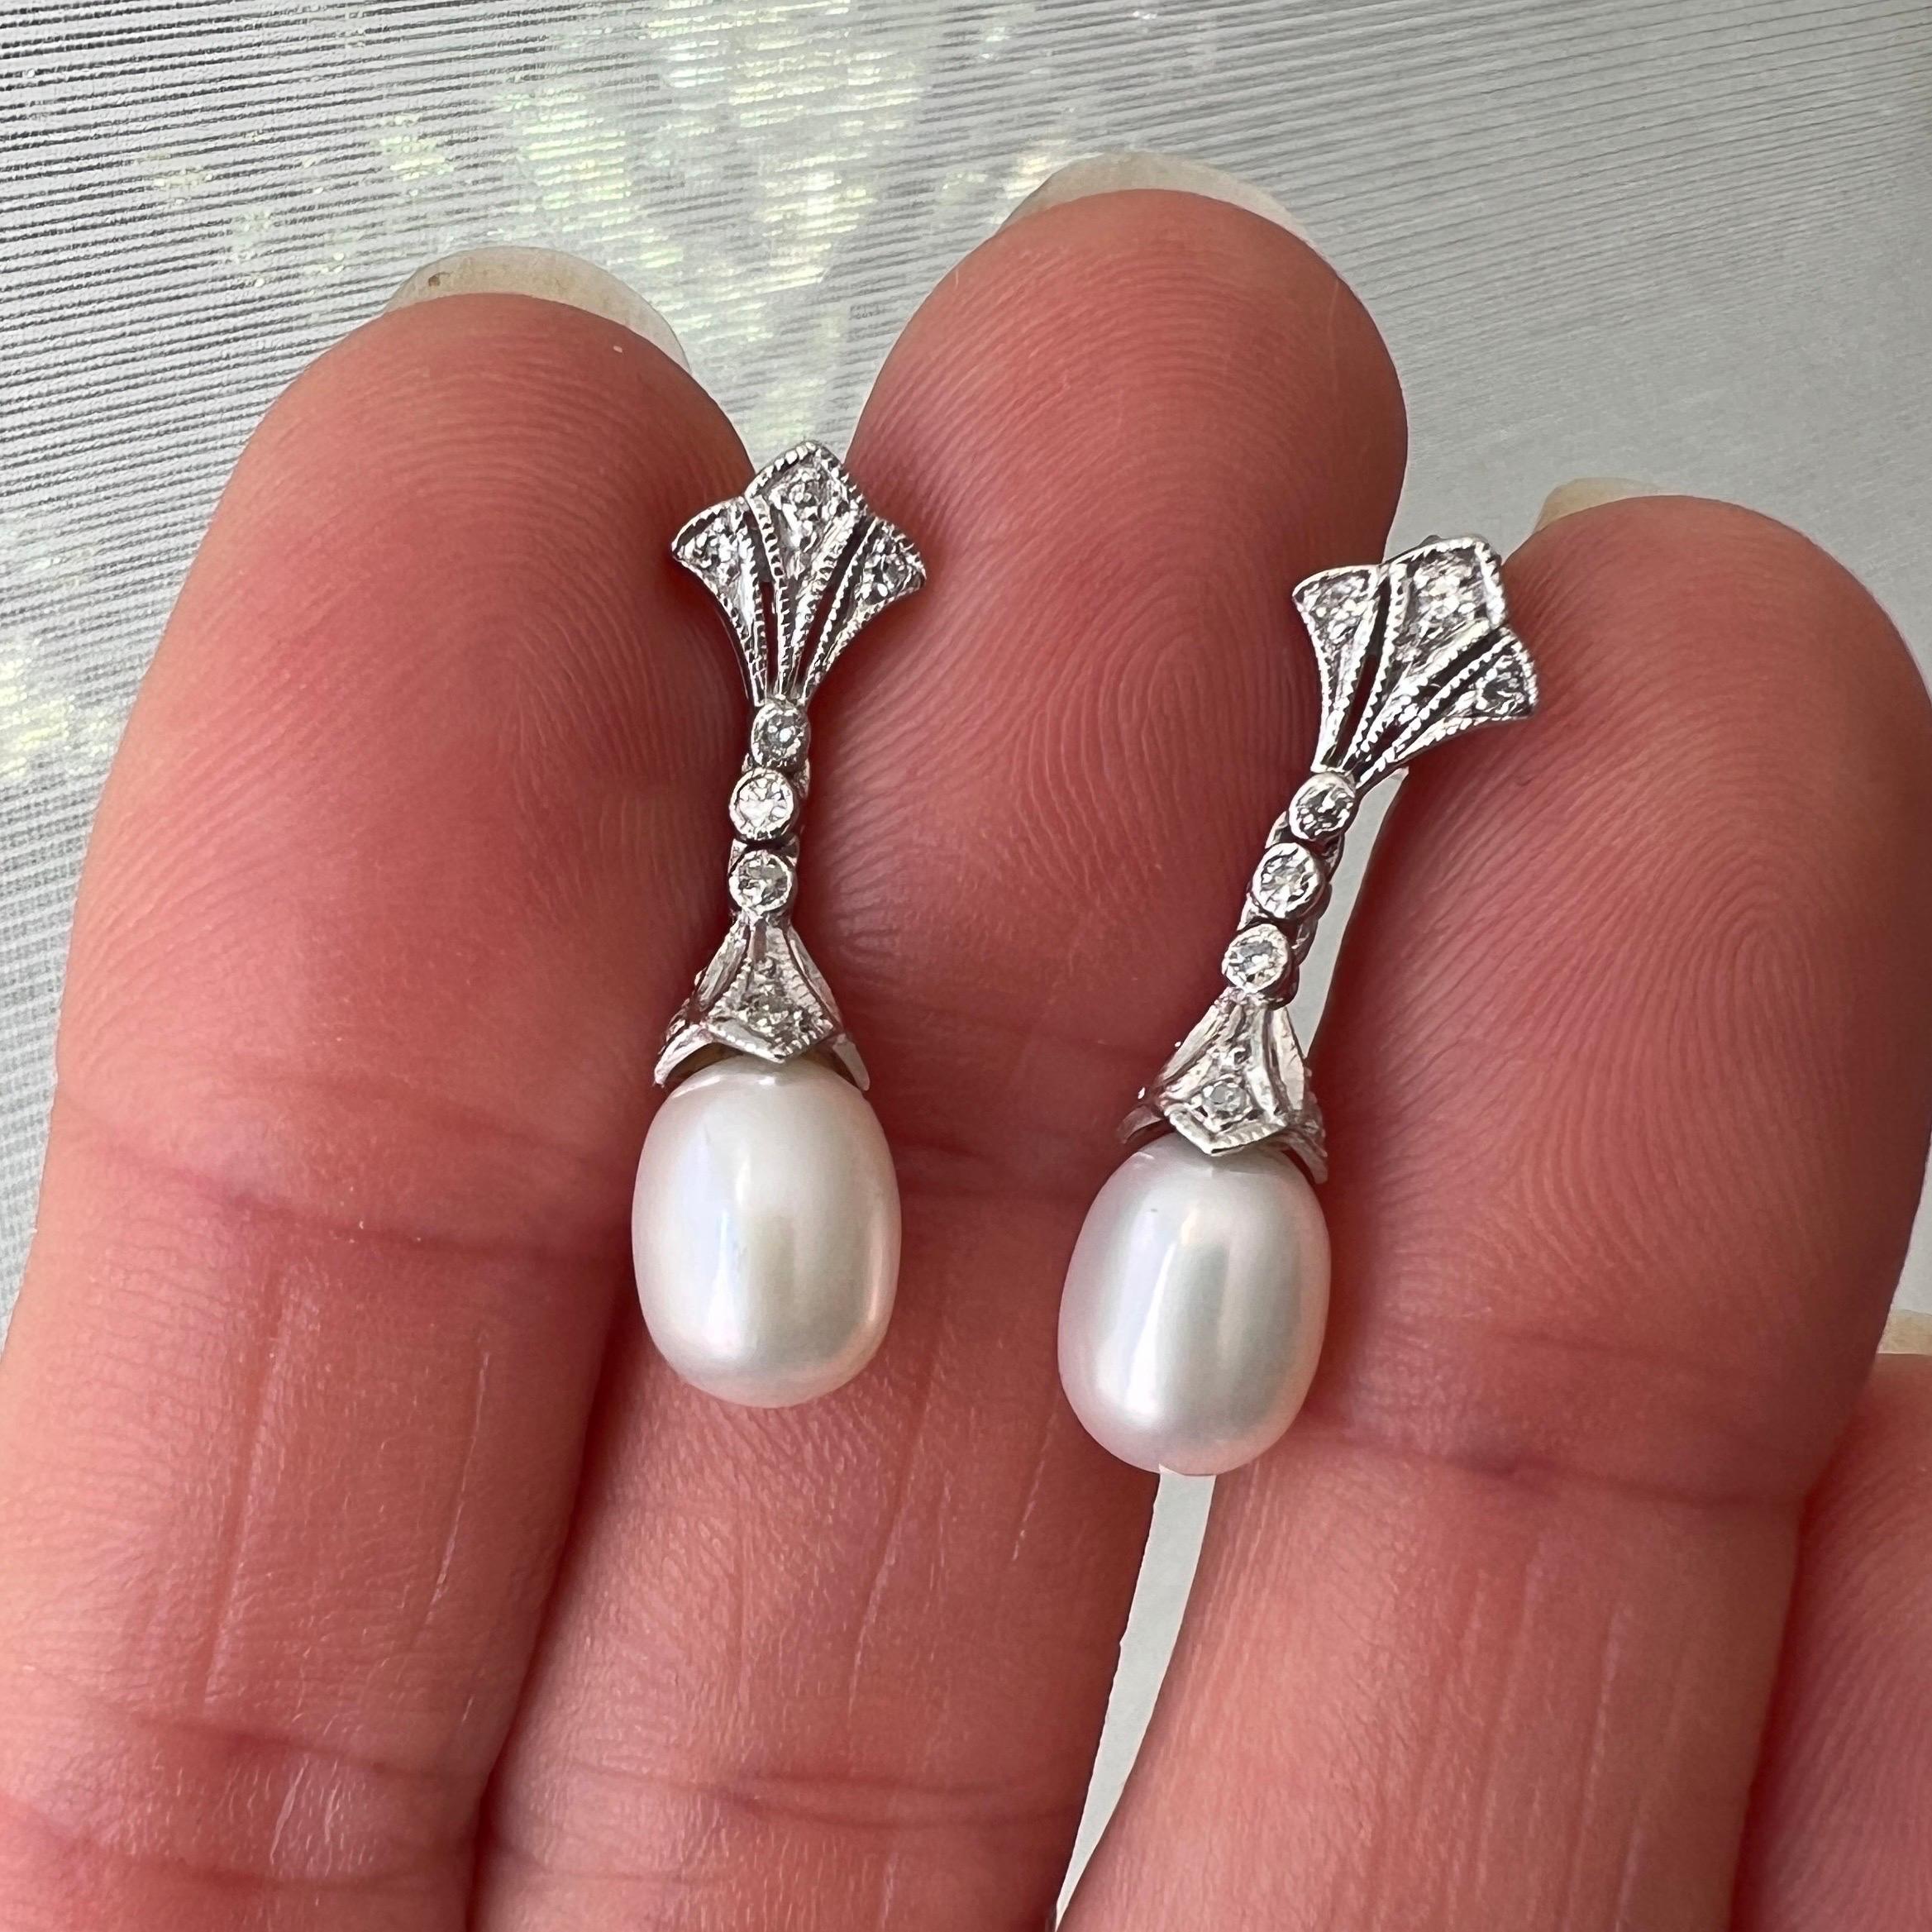 These lovely Art Deco 14 karat white gold earrings are set with a drop-shaped pearl. The upper part of the earrings are shaped into a fan, set with brilliant cut diamonds and mille griffe white gold. The mid-section consists of three movable links,